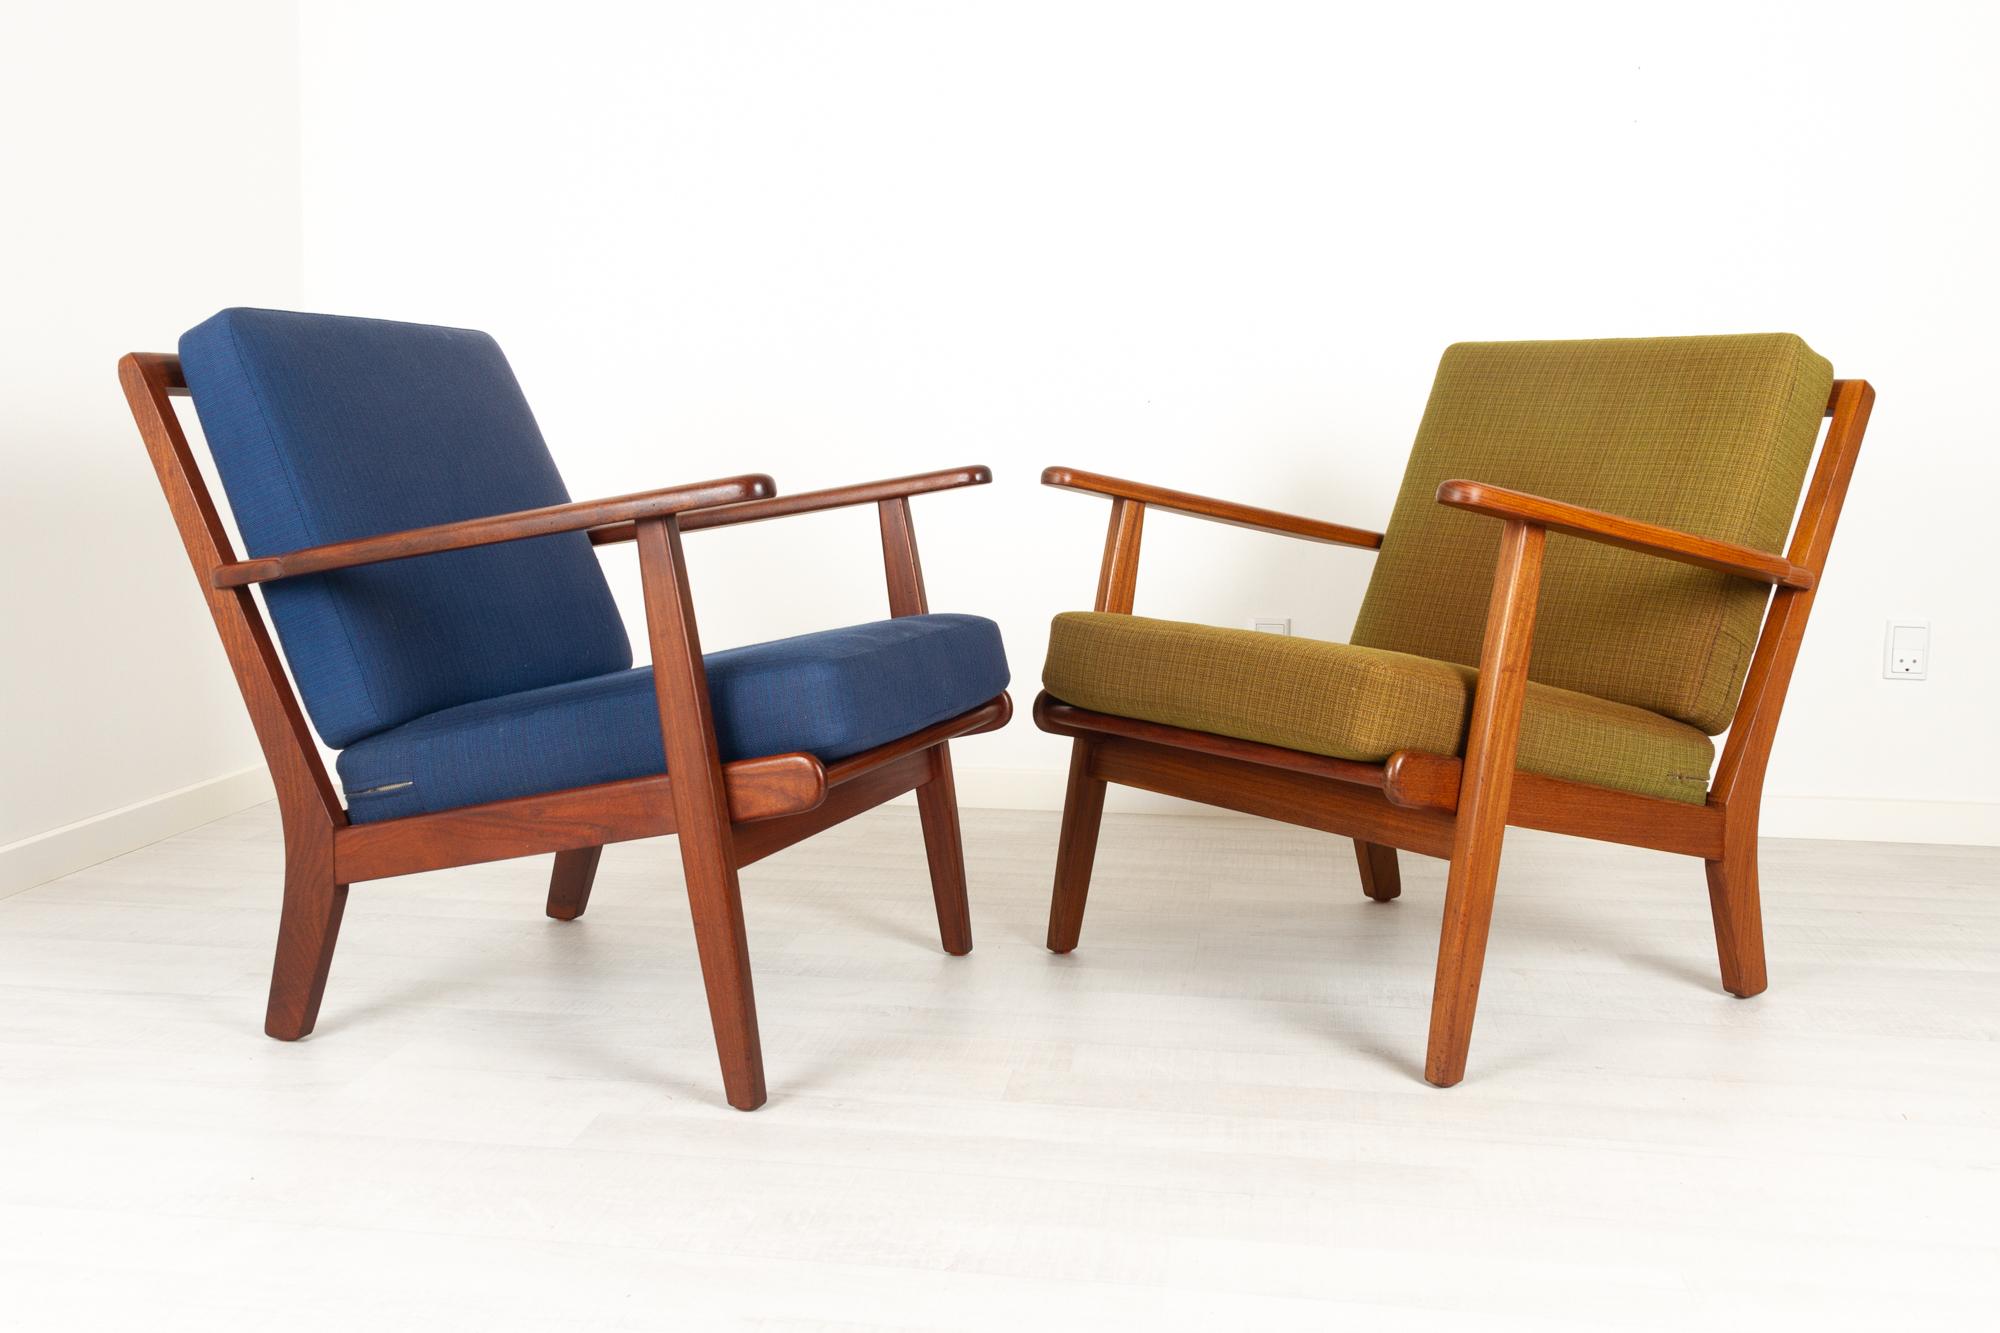 Vintage Danish Lounge Chairs by Aage Pedersen for GETAMA 1960s, Set of 2 In Good Condition For Sale In Asaa, DK